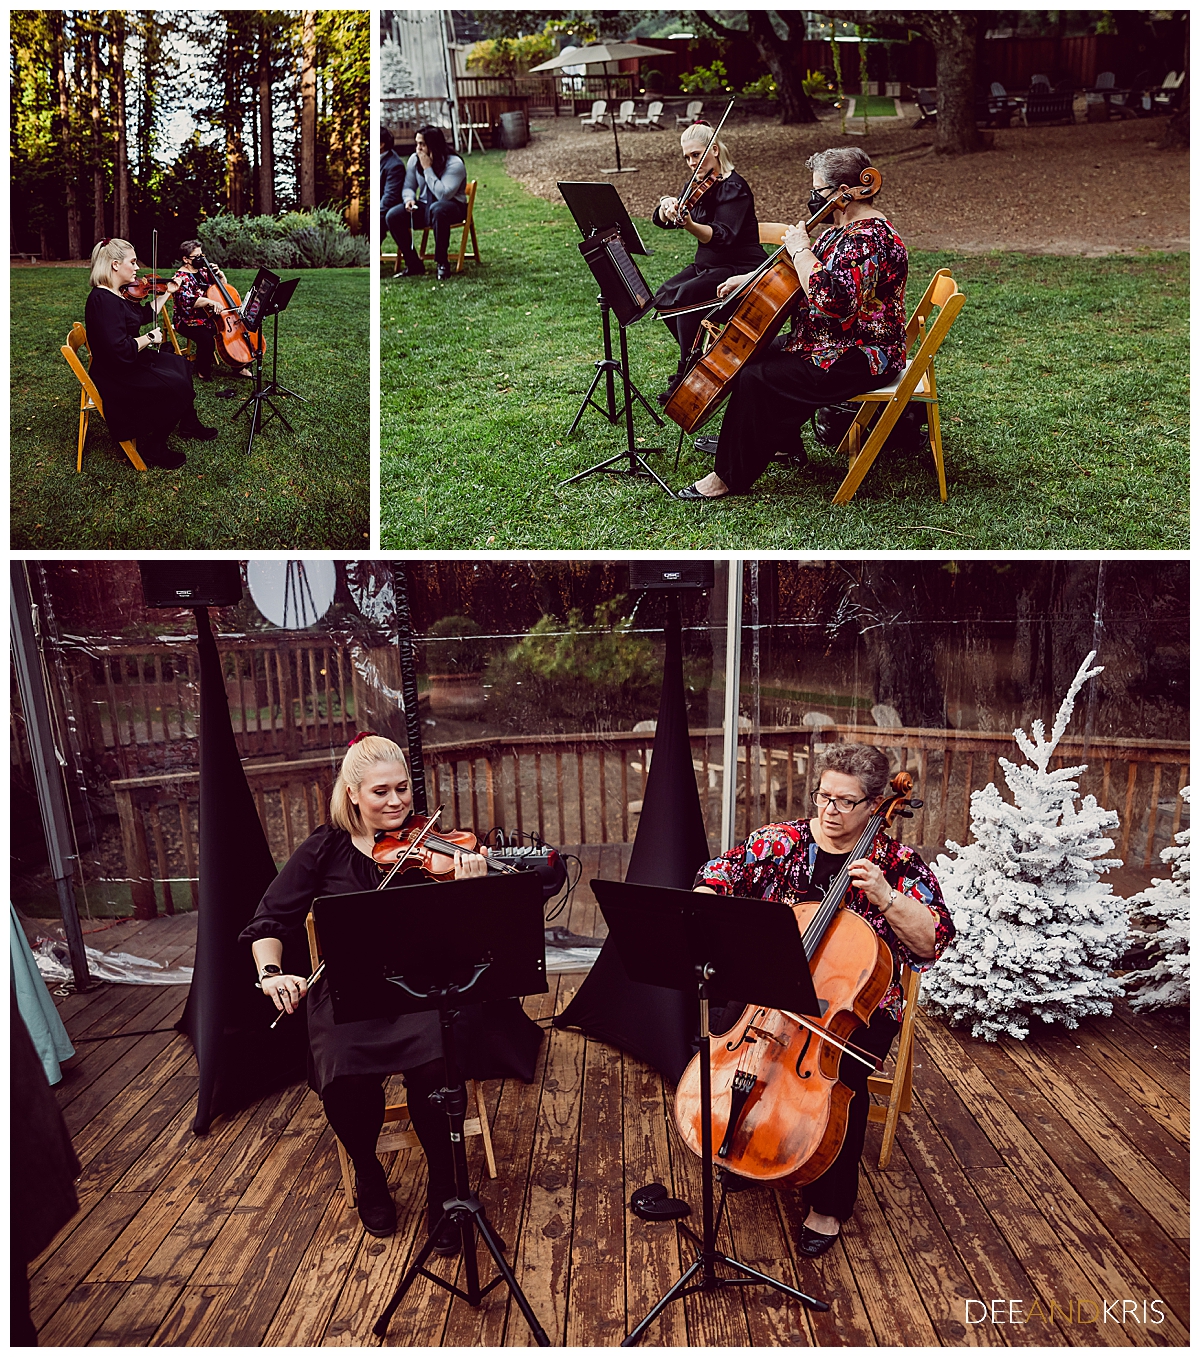 Three images: Top left image of violinist playing. Top right image of Violinist and cellist playing. Bottom image of violinist and cellist playing.